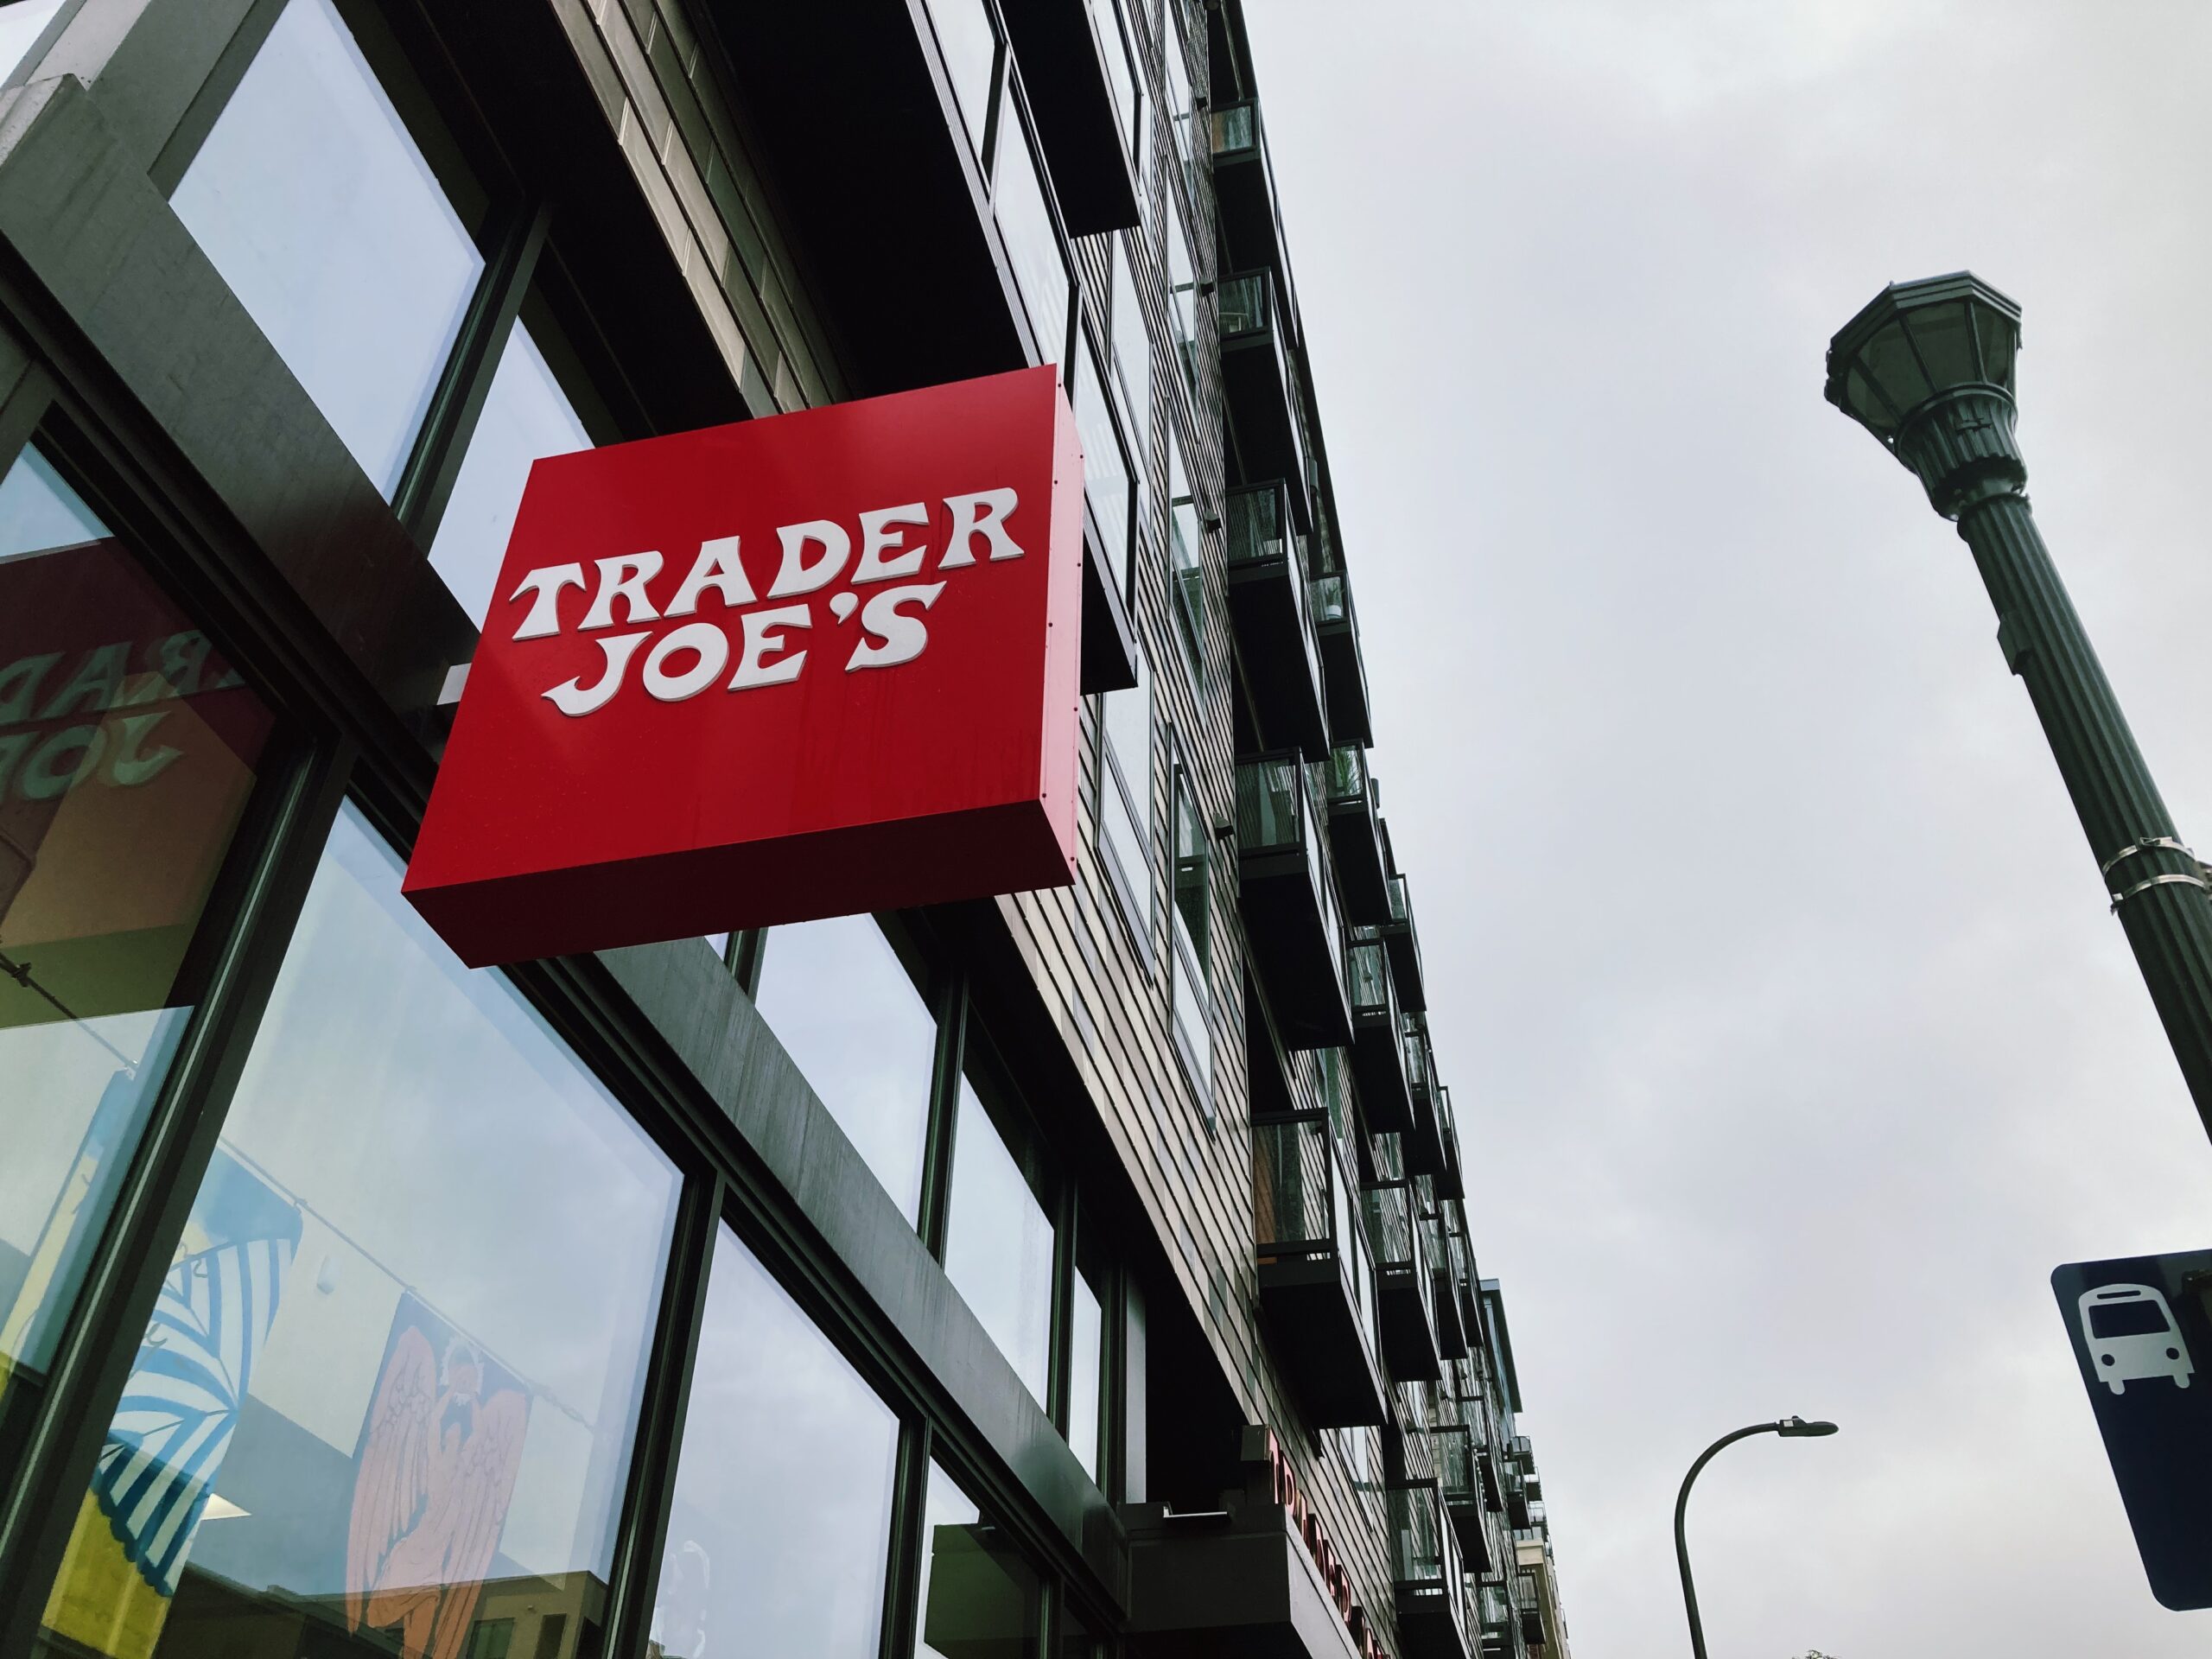 looking up at a red shop sign that reads "trader joe's" in white, a lampost and building are in the background